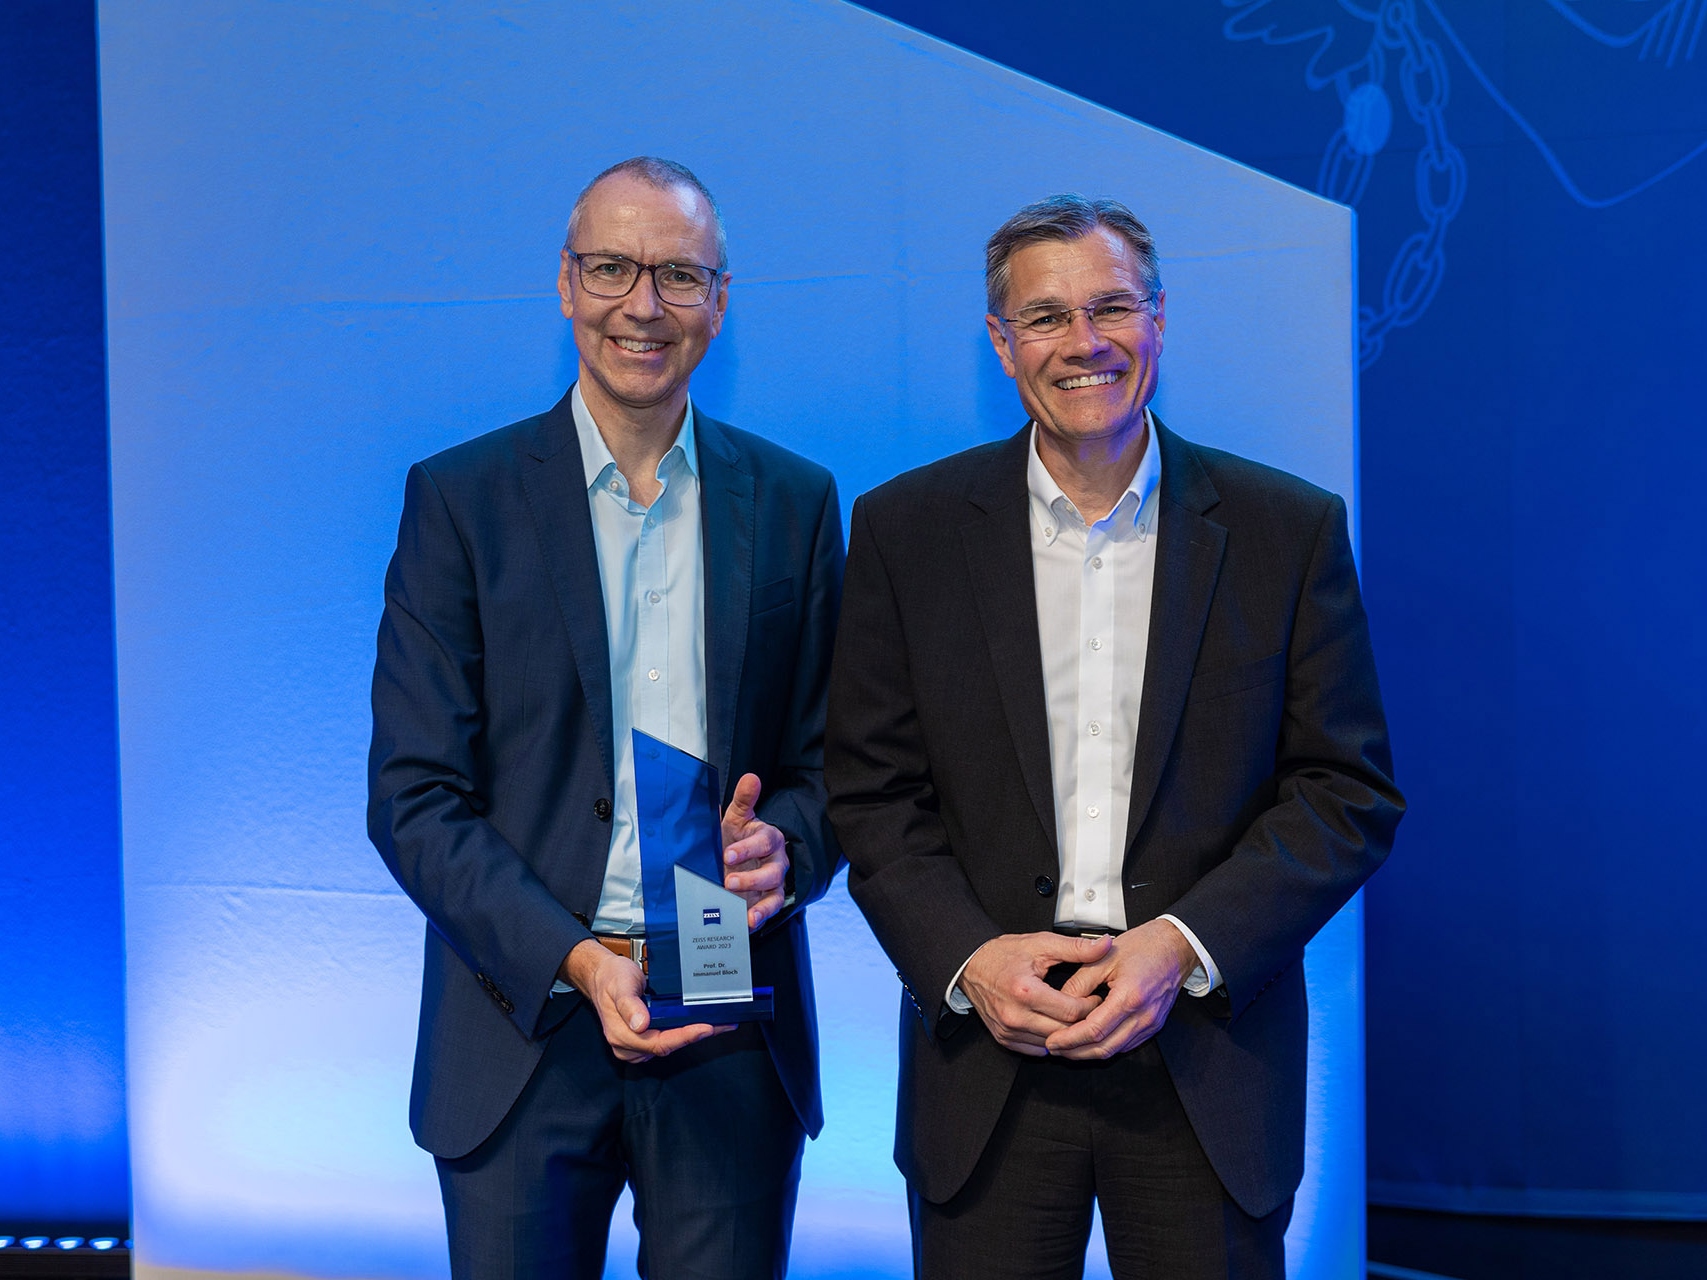 Prof. Dr. Immanuel Bloch, winner of this year's ZEISS Research Award and Dr. Karl Lamprecht, ZEISS CEO.